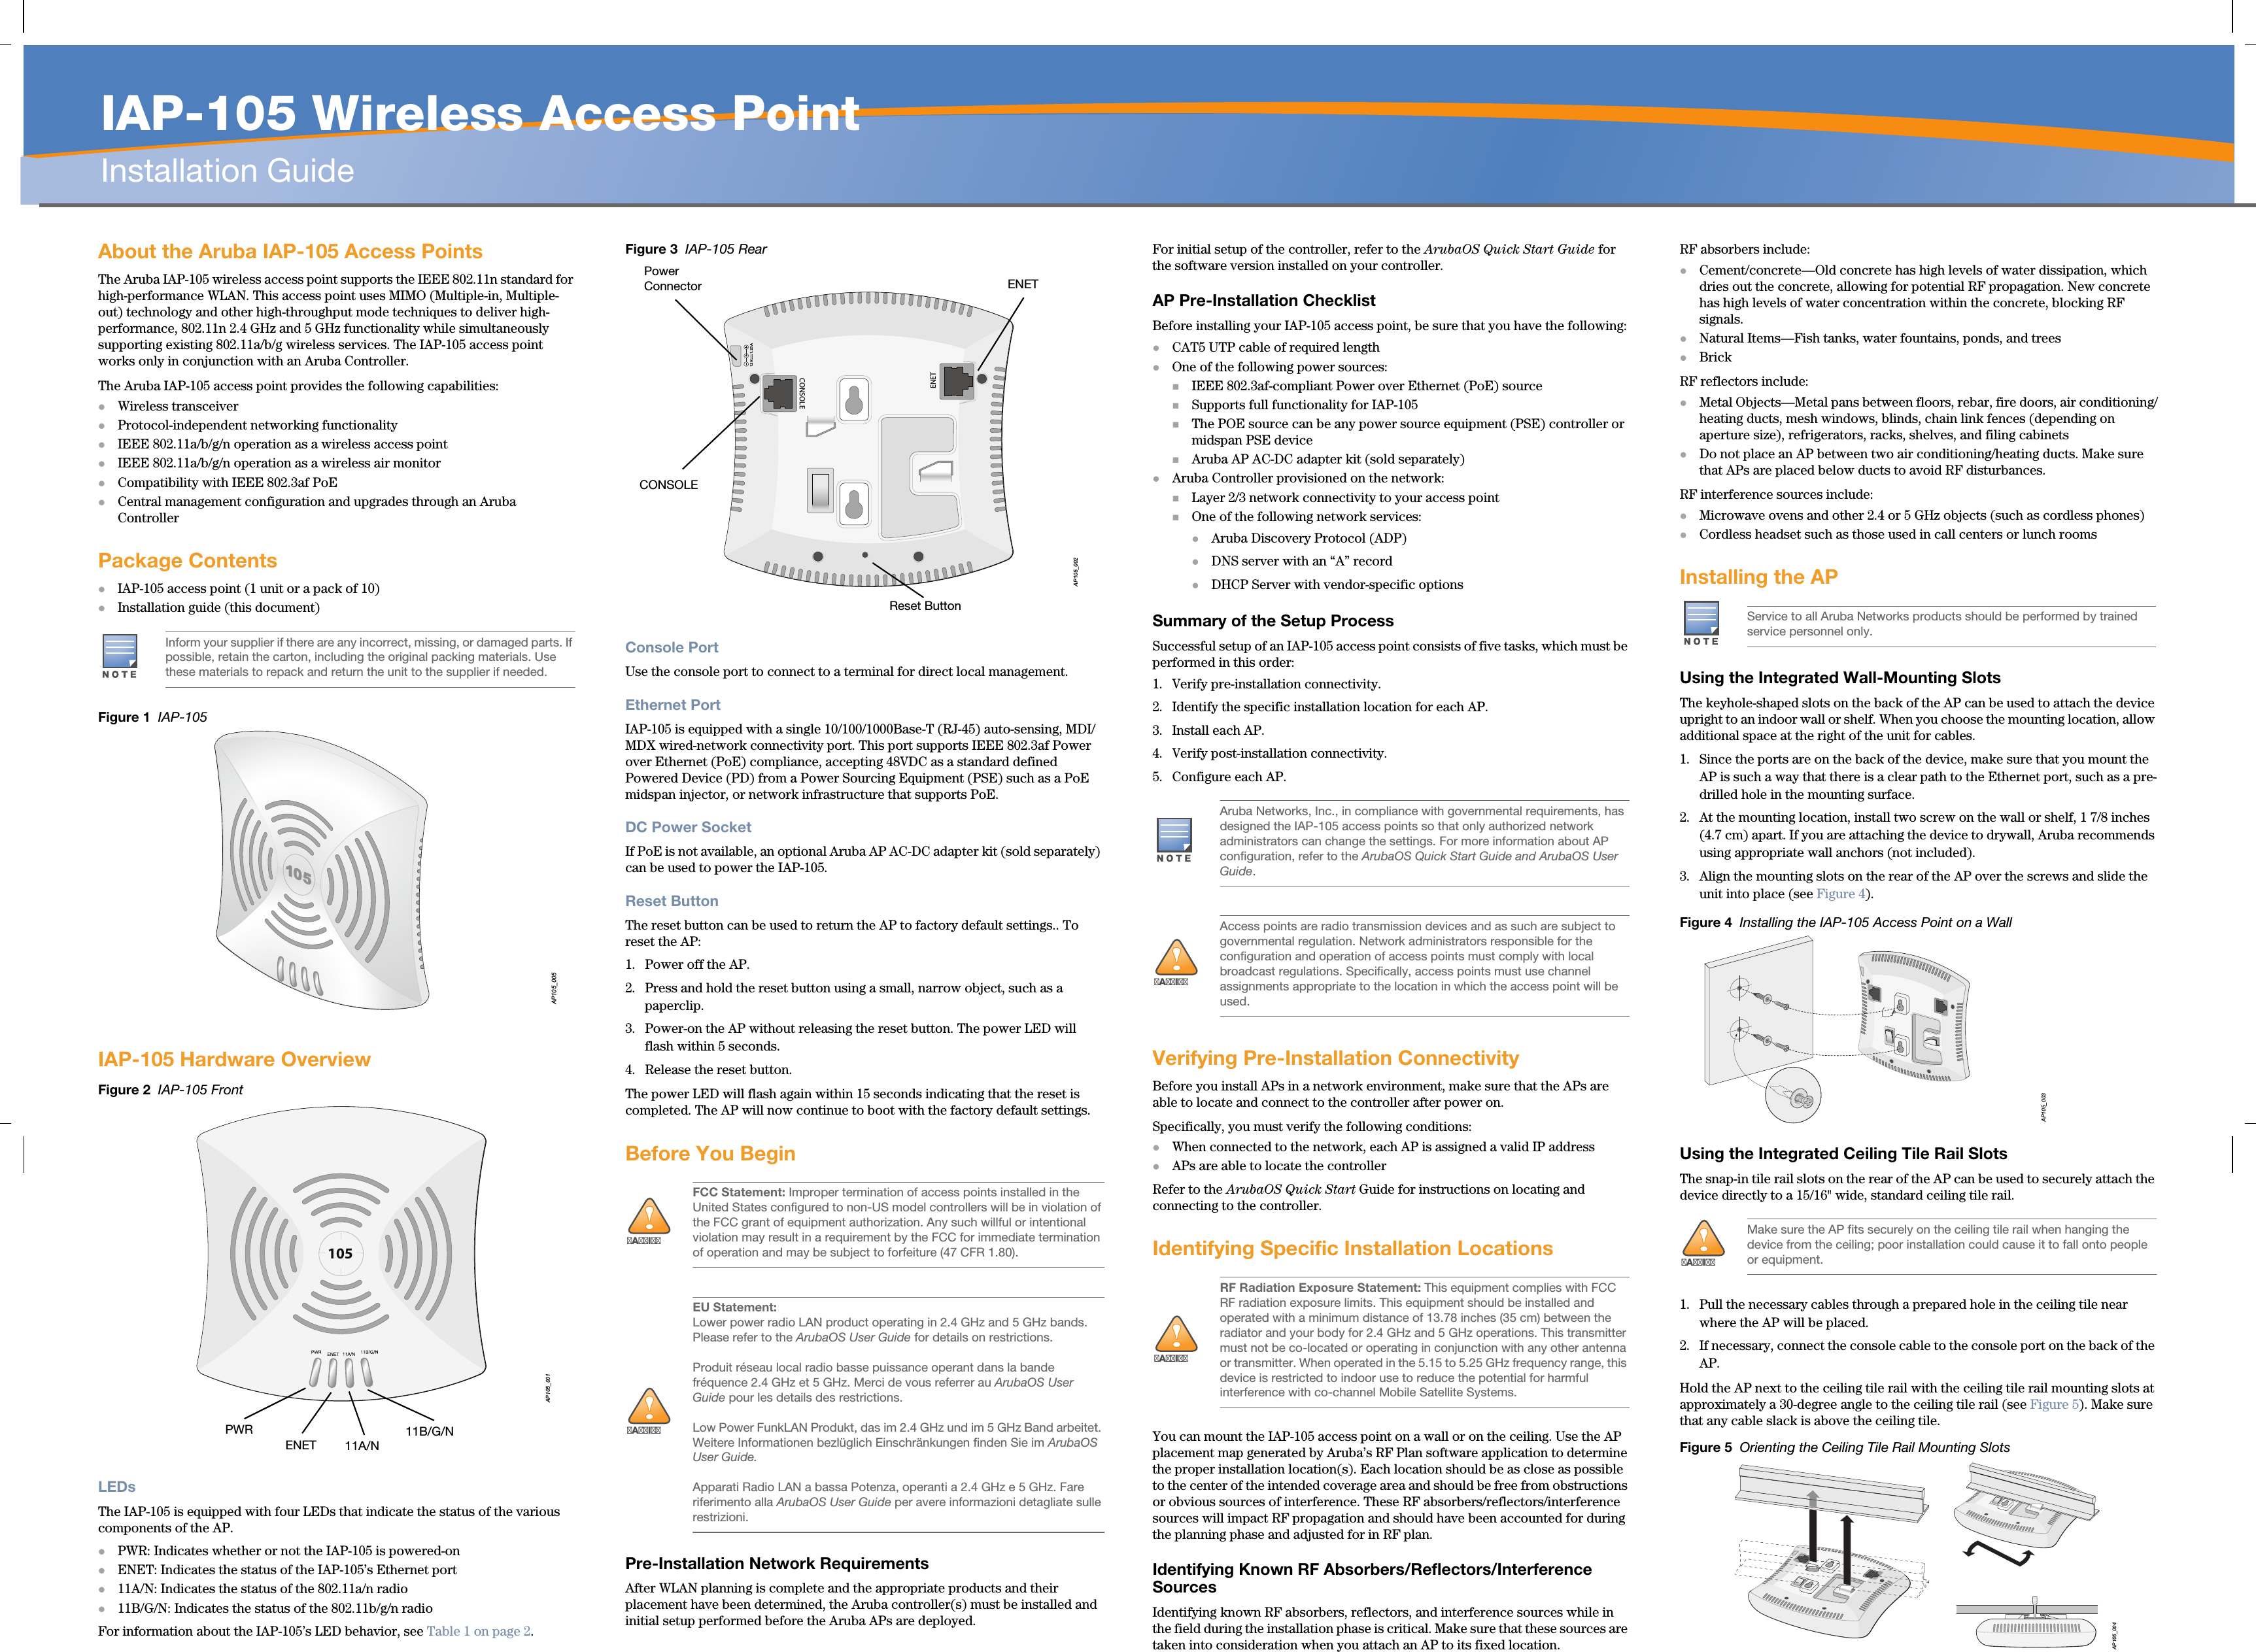   IAP-105 Wireless Access PointInstallation GuideAbout the Aruba IAP-105 Access PointsThe Aruba IAP-105 wireless access point supports the IEEE 802.11n standard for high-performance WLAN. This access point uses MIMO (Multiple-in, Multiple-out) technology and other high-throughput mode techniques to deliver high-performance, 802.11n 2.4 GHz and 5 GHz functionality while simultaneously supporting existing 802.11a/b/g wireless services. The IAP-105 access point works only in conjunction with an Aruba Controller.The Aruba IAP-105 access point provides the following capabilities:Wireless transceiverProtocol-independent networking functionalityIEEE 802.11a/b/g/n operation as a wireless access pointIEEE 802.11a/b/g/n operation as a wireless air monitorCompatibility with IEEE 802.3af PoE Central management configuration and upgrades through an Aruba ControllerPackage ContentsIAP-105 access point (1 unit or a pack of 10)Installation guide (this document)Figure 1  IAP-105IAP-105 Hardware OverviewFigure 2  IAP-105 FrontLEDsThe IAP-105 is equipped with four LEDs that indicate the status of the various components of the AP.PWR: Indicates whether or not the IAP-105 is powered-onENET: Indicates the status of the IAP-105’s Ethernet port11A/N: Indicates the status of the 802.11a/n radio11B/G/N: Indicates the status of the 802.11b/g/n radioFor information about the IAP-105’s LED behavior, see Table 1 on page 2.Figure 3  IAP-105 RearConsole PortUse the console port to connect to a terminal for direct local management.Ethernet PortIAP-105 is equipped with a single 10/100/1000Base-T (RJ-45) auto-sensing, MDI/MDX wired-network connectivity port. This port supports IEEE 802.3af Power over Ethernet (PoE) compliance, accepting 48VDC as a standard defined Powered Device (PD) from a Power Sourcing Equipment (PSE) such as a PoE midspan injector, or network infrastructure that supports PoE.DC Power SocketIf PoE is not available, an optional Aruba AP AC-DC adapter kit (sold separately) can be used to power the IAP-105. Reset ButtonThe reset button can be used to return the AP to factory default settings.. To reset the AP:1. Power off the AP.2. Press and hold the reset button using a small, narrow object, such as a paperclip.3. Power-on the AP without releasing the reset button. The power LED will flash within 5 seconds.4. Release the reset button.The power LED will flash again within 15 seconds indicating that the reset is completed. The AP will now continue to boot with the factory default settings.Before You BeginPre-Installation Network RequirementsAfter WLAN planning is complete and the appropriate products and their placement have been determined, the Aruba controller(s) must be installed and initial setup performed before the Aruba APs are deployed.For initial setup of the controller, refer to the ArubaOS Quick Start Guide for the software version installed on your controller.AP Pre-Installation ChecklistBefore installing your IAP-105 access point, be sure that you have the following:CAT5 UTP cable of required lengthOne of the following power sources:IEEE 802.3af-compliant Power over Ethernet (PoE) sourceSupports full functionality for IAP-105The POE source can be any power source equipment (PSE) controller or midspan PSE deviceAruba AP AC-DC adapter kit (sold separately)Aruba Controller provisioned on the network:Layer 2/3 network connectivity to your access pointOne of the following network services:Aruba Discovery Protocol (ADP)DNS server with an “A” recordDHCP Server with vendor-specific optionsSummary of the Setup ProcessSuccessful setup of an IAP-105 access point consists of five tasks, which must be performed in this order:1. Verify pre-installation connectivity.2. Identify the specific installation location for each AP.3. Install each AP.4. Verify post-installation connectivity.5. Configure each AP.Verifying Pre-Installation ConnectivityBefore you install APs in a network environment, make sure that the APs are able to locate and connect to the controller after power on.Specifically, you must verify the following conditions:When connected to the network, each AP is assigned a valid IP addressAPs are able to locate the controller Refer to the ArubaOS Quick Start Guide for instructions on locating and connecting to the controller.Identifying Specific Installation LocationsYou can mount the IAP-105 access point on a wall or on the ceiling. Use the AP placement map generated by Aruba’s RF Plan software application to determine the proper installation location(s). Each location should be as close as possible to the center of the intended coverage area and should be free from obstructions or obvious sources of interference. These RF absorbers/reflectors/interference sources will impact RF propagation and should have been accounted for during the planning phase and adjusted for in RF plan.Identifying Known RF Absorbers/Reflectors/Interference SourcesIdentifying known RF absorbers, reflectors, and interference sources while in the field during the installation phase is critical. Make sure that these sources are taken into consideration when you attach an AP to its fixed location.RF absorbers include:Cement/concrete—Old concrete has high levels of water dissipation, which dries out the concrete, allowing for potential RF propagation. New concrete has high levels of water concentration within the concrete, blocking RF signals.Natural Items—Fish tanks, water fountains, ponds, and treesBrickRF reflectors include:Metal Objects—Metal pans between floors, rebar, fire doors, air conditioning/heating ducts, mesh windows, blinds, chain link fences (depending on aperture size), refrigerators, racks, shelves, and filing cabinetsDo not place an AP between two air conditioning/heating ducts. Make sure that APs are placed below ducts to avoid RF disturbances.RF interference sources include:Microwave ovens and other 2.4 or 5 GHz objects (such as cordless phones)Cordless headset such as those used in call centers or lunch roomsInstalling the APUsing the Integrated Wall-Mounting SlotsThe keyhole-shaped slots on the back of the AP can be used to attach the device upright to an indoor wall or shelf. When you choose the mounting location, allow additional space at the right of the unit for cables.1. Since the ports are on the back of the device, make sure that you mount the AP is such a way that there is a clear path to the Ethernet port, such as a pre-drilled hole in the mounting surface.2. At the mounting location, install two screw on the wall or shelf, 1 7/8 inches (4.7 cm) apart. If you are attaching the device to drywall, Aruba recommends using appropriate wall anchors (not included).3. Align the mounting slots on the rear of the AP over the screws and slide the unit into place (see Figure 4).Figure 4  Installing the IAP-105 Access Point on a WallUsing the Integrated Ceiling Tile Rail SlotsThe snap-in tile rail slots on the rear of the AP can be used to securely attach the device directly to a 15/16&quot; wide, standard ceiling tile rail.1. Pull the necessary cables through a prepared hole in the ceiling tile near where the AP will be placed.2. If necessary, connect the console cable to the console port on the back of the AP.Hold the AP next to the ceiling tile rail with the ceiling tile rail mounting slots at approximately a 30-degree angle to the ceiling tile rail (see Figure 5). Make sure that any cable slack is above the ceiling tile.Figure 5  Orienting the Ceiling Tile Rail Mounting SlotsInform your supplier if there are any incorrect, missing, or damaged parts. If possible, retain the carton, including the original packing materials. Use these materials to repack and return the unit to the supplier if needed.AP105_005AP105_001105PWRENET11B/G/N11A/N!AIFCC Statement: Improper termination of access points installed in the United States configured to non-US model controllers will be in violation of the FCC grant of equipment authorization. Any such willful or intentional violation may result in a requirement by the FCC for immediate termination of operation and may be subject to forfeiture (47 CFR 1.80).!AIEU Statement: Lower power radio LAN product operating in 2.4 GHz and 5 GHz bands. Please refer to the ArubaOS User Guide for details on restrictions.Produit réseau local radio basse puissance operant dans la bande fréquence 2.4 GHz et 5 GHz. Merci de vous referrer au ArubaOS User Guide pour les details des restrictions.Low Power FunkLAN Produkt, das im 2.4 GHz und im 5 GHz Band arbeitet. Weitere Informationen bezlüglich Einschränkungen finden Sie im ArubaOS User Guide.Apparati Radio LAN a bassa Potenza, operanti a 2.4 GHz e 5 GHz. Fare riferimento alla ArubaOS User Guide per avere informazioni detagliate sulle restrizioni.AP105_002CONSOLEENET12V       1.25ACONSOLEENETPower ConnectorReset ButtonAruba Networks, Inc., in compliance with governmental requirements, has designed the IAP-105 access points so that only authorized network administrators can change the settings. For more information about AP configuration, refer to the ArubaOS Quick Start Guide and ArubaOS User Guide.!AIAccess points are radio transmission devices and as such are subject to governmental regulation. Network administrators responsible for the configuration and operation of access points must comply with local broadcast regulations. Specifically, access points must use channel assignments appropriate to the location in which the access point will be used.!AIRF Radiation Exposure Statement: This equipment complies with FCC RF radiation exposure limits. This equipment should be installed and operated with a minimum distance of 13.78 inches (35 cm) between the radiator and your body for 2.4 GHz and 5 GHz operations. This transmitter must not be co-located or operating in conjunction with any other antenna or transmitter. When operated in the 5.15 to 5.25 GHz frequency range, this device is restricted to indoor use to reduce the potential for harmful interference with co-channel Mobile Satellite Systems.Service to all Aruba Networks products should be performed by trained service personnel only.!AIMake sure the AP fits securely on the ceiling tile rail when hanging the device from the ceiling; poor installation could cause it to fall onto people or equipment.AP105_003AP105_004